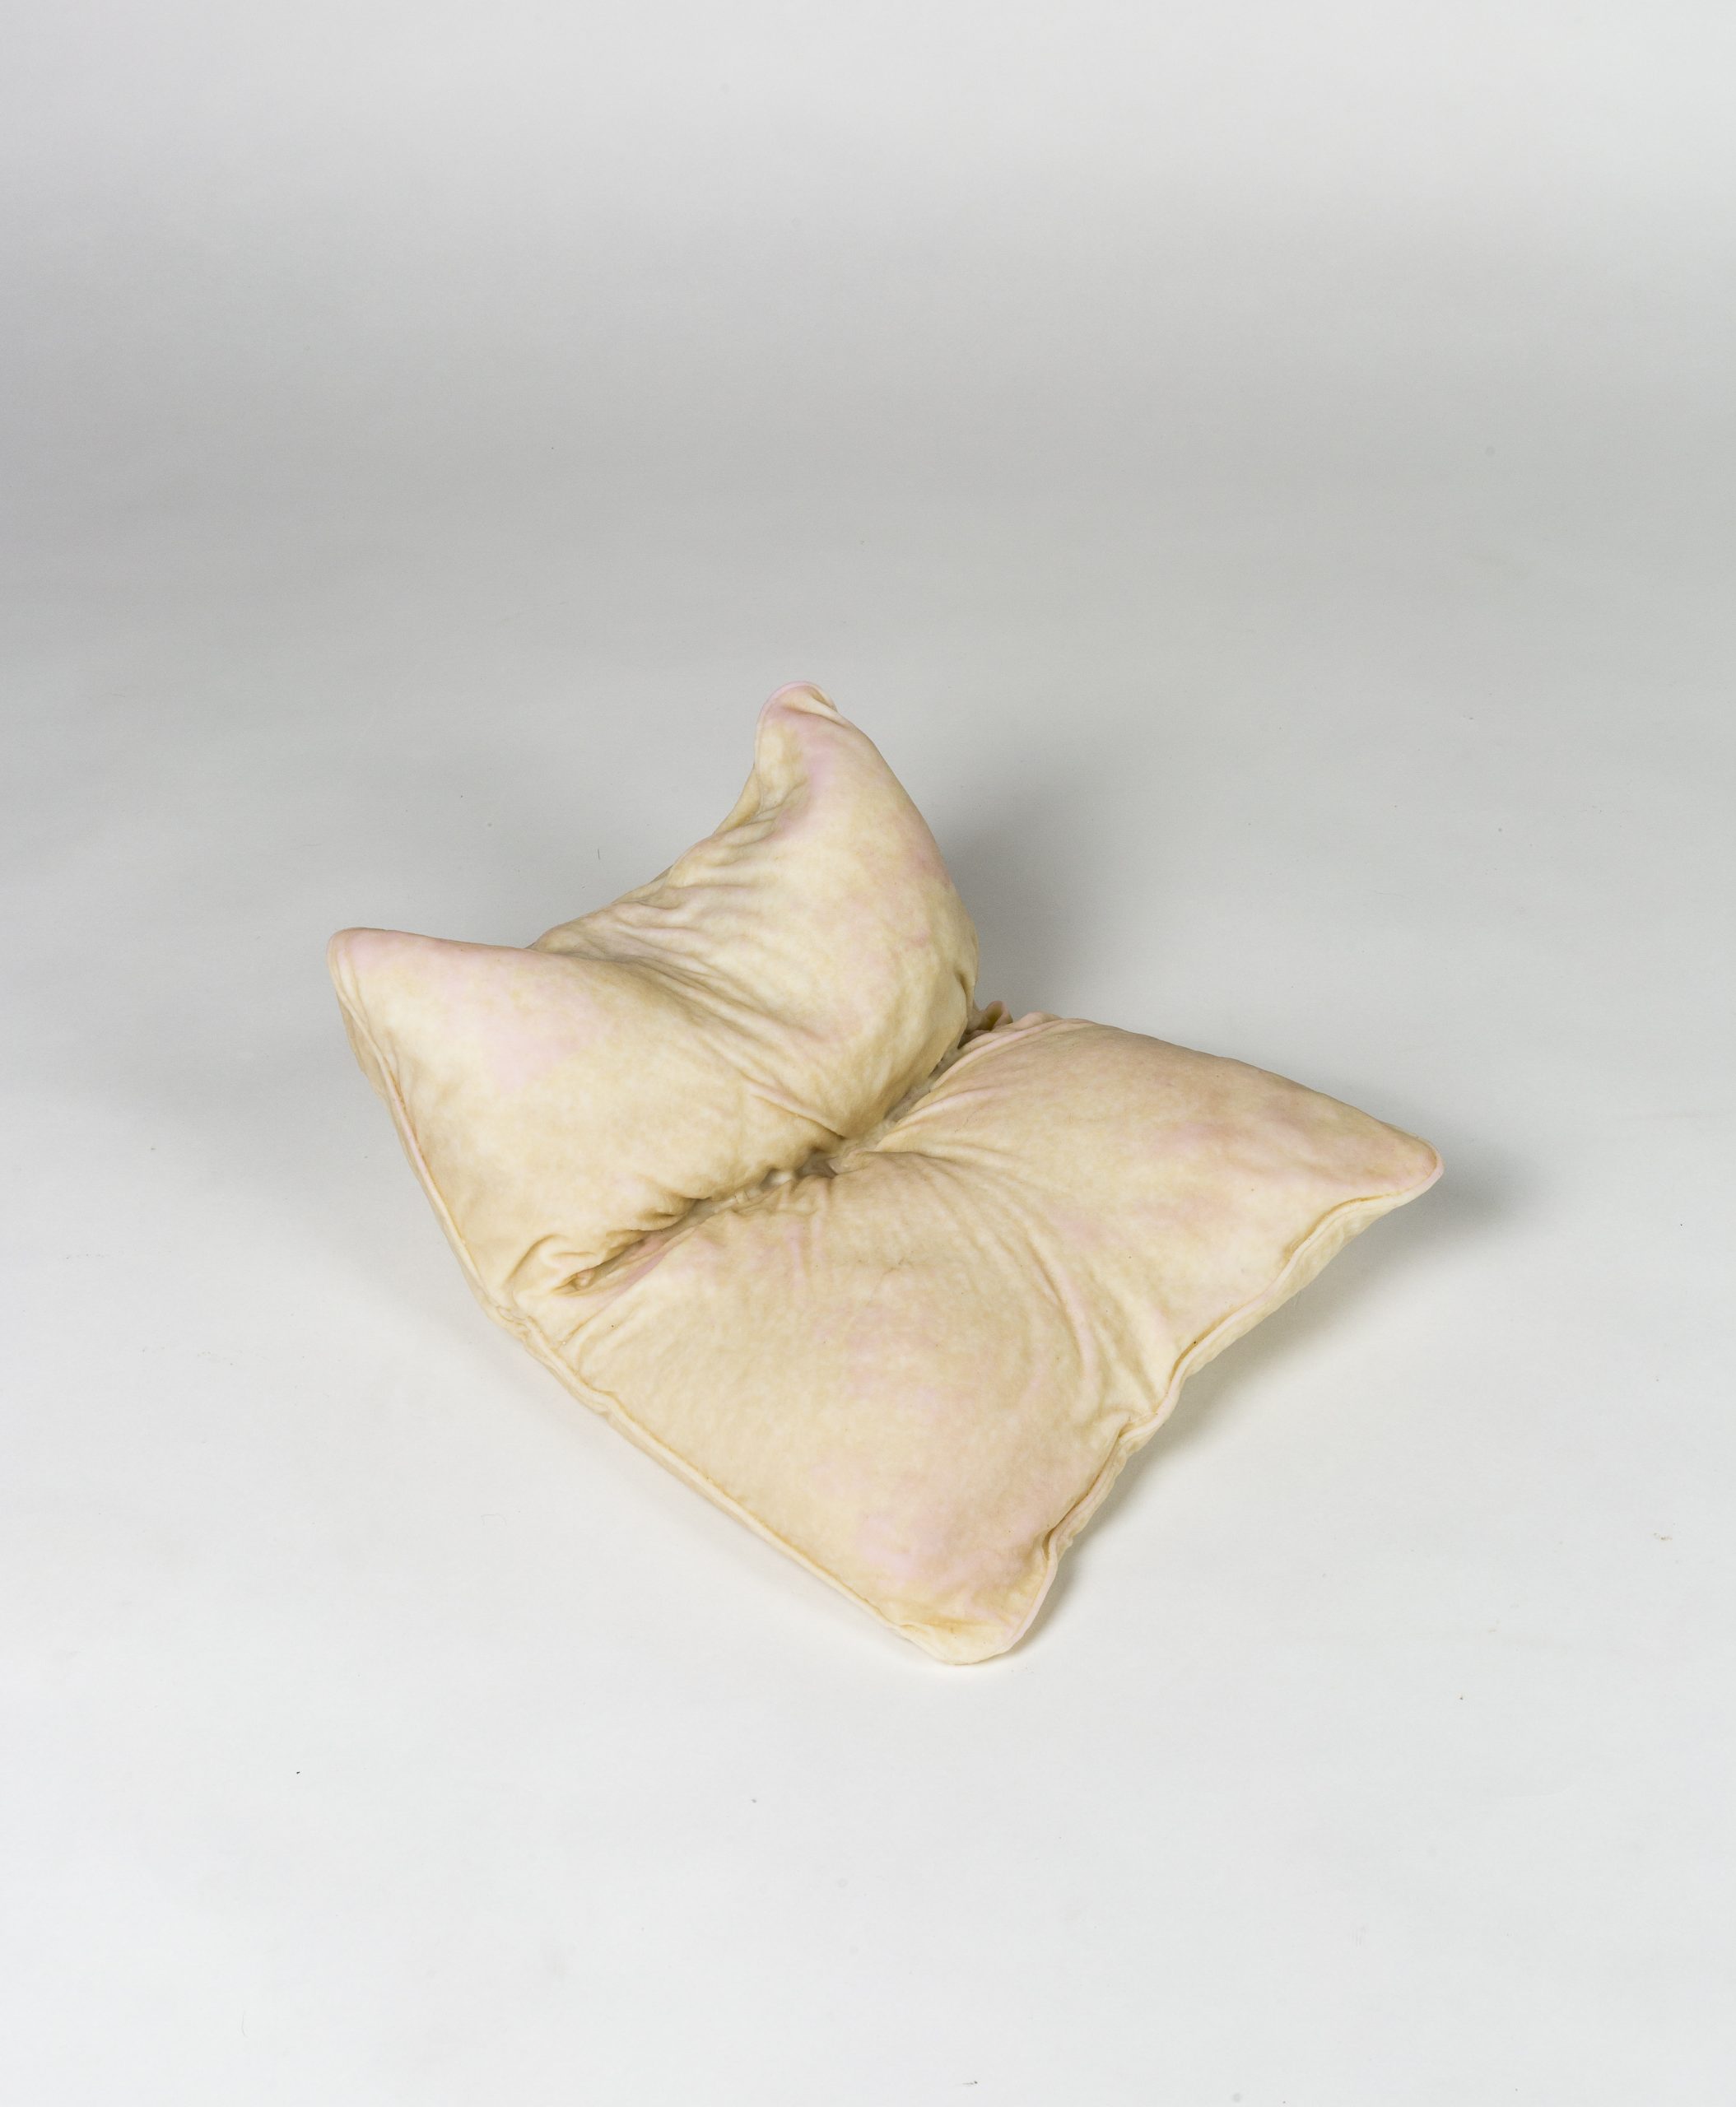 Glass white and pink pillow, folded and on the floor.